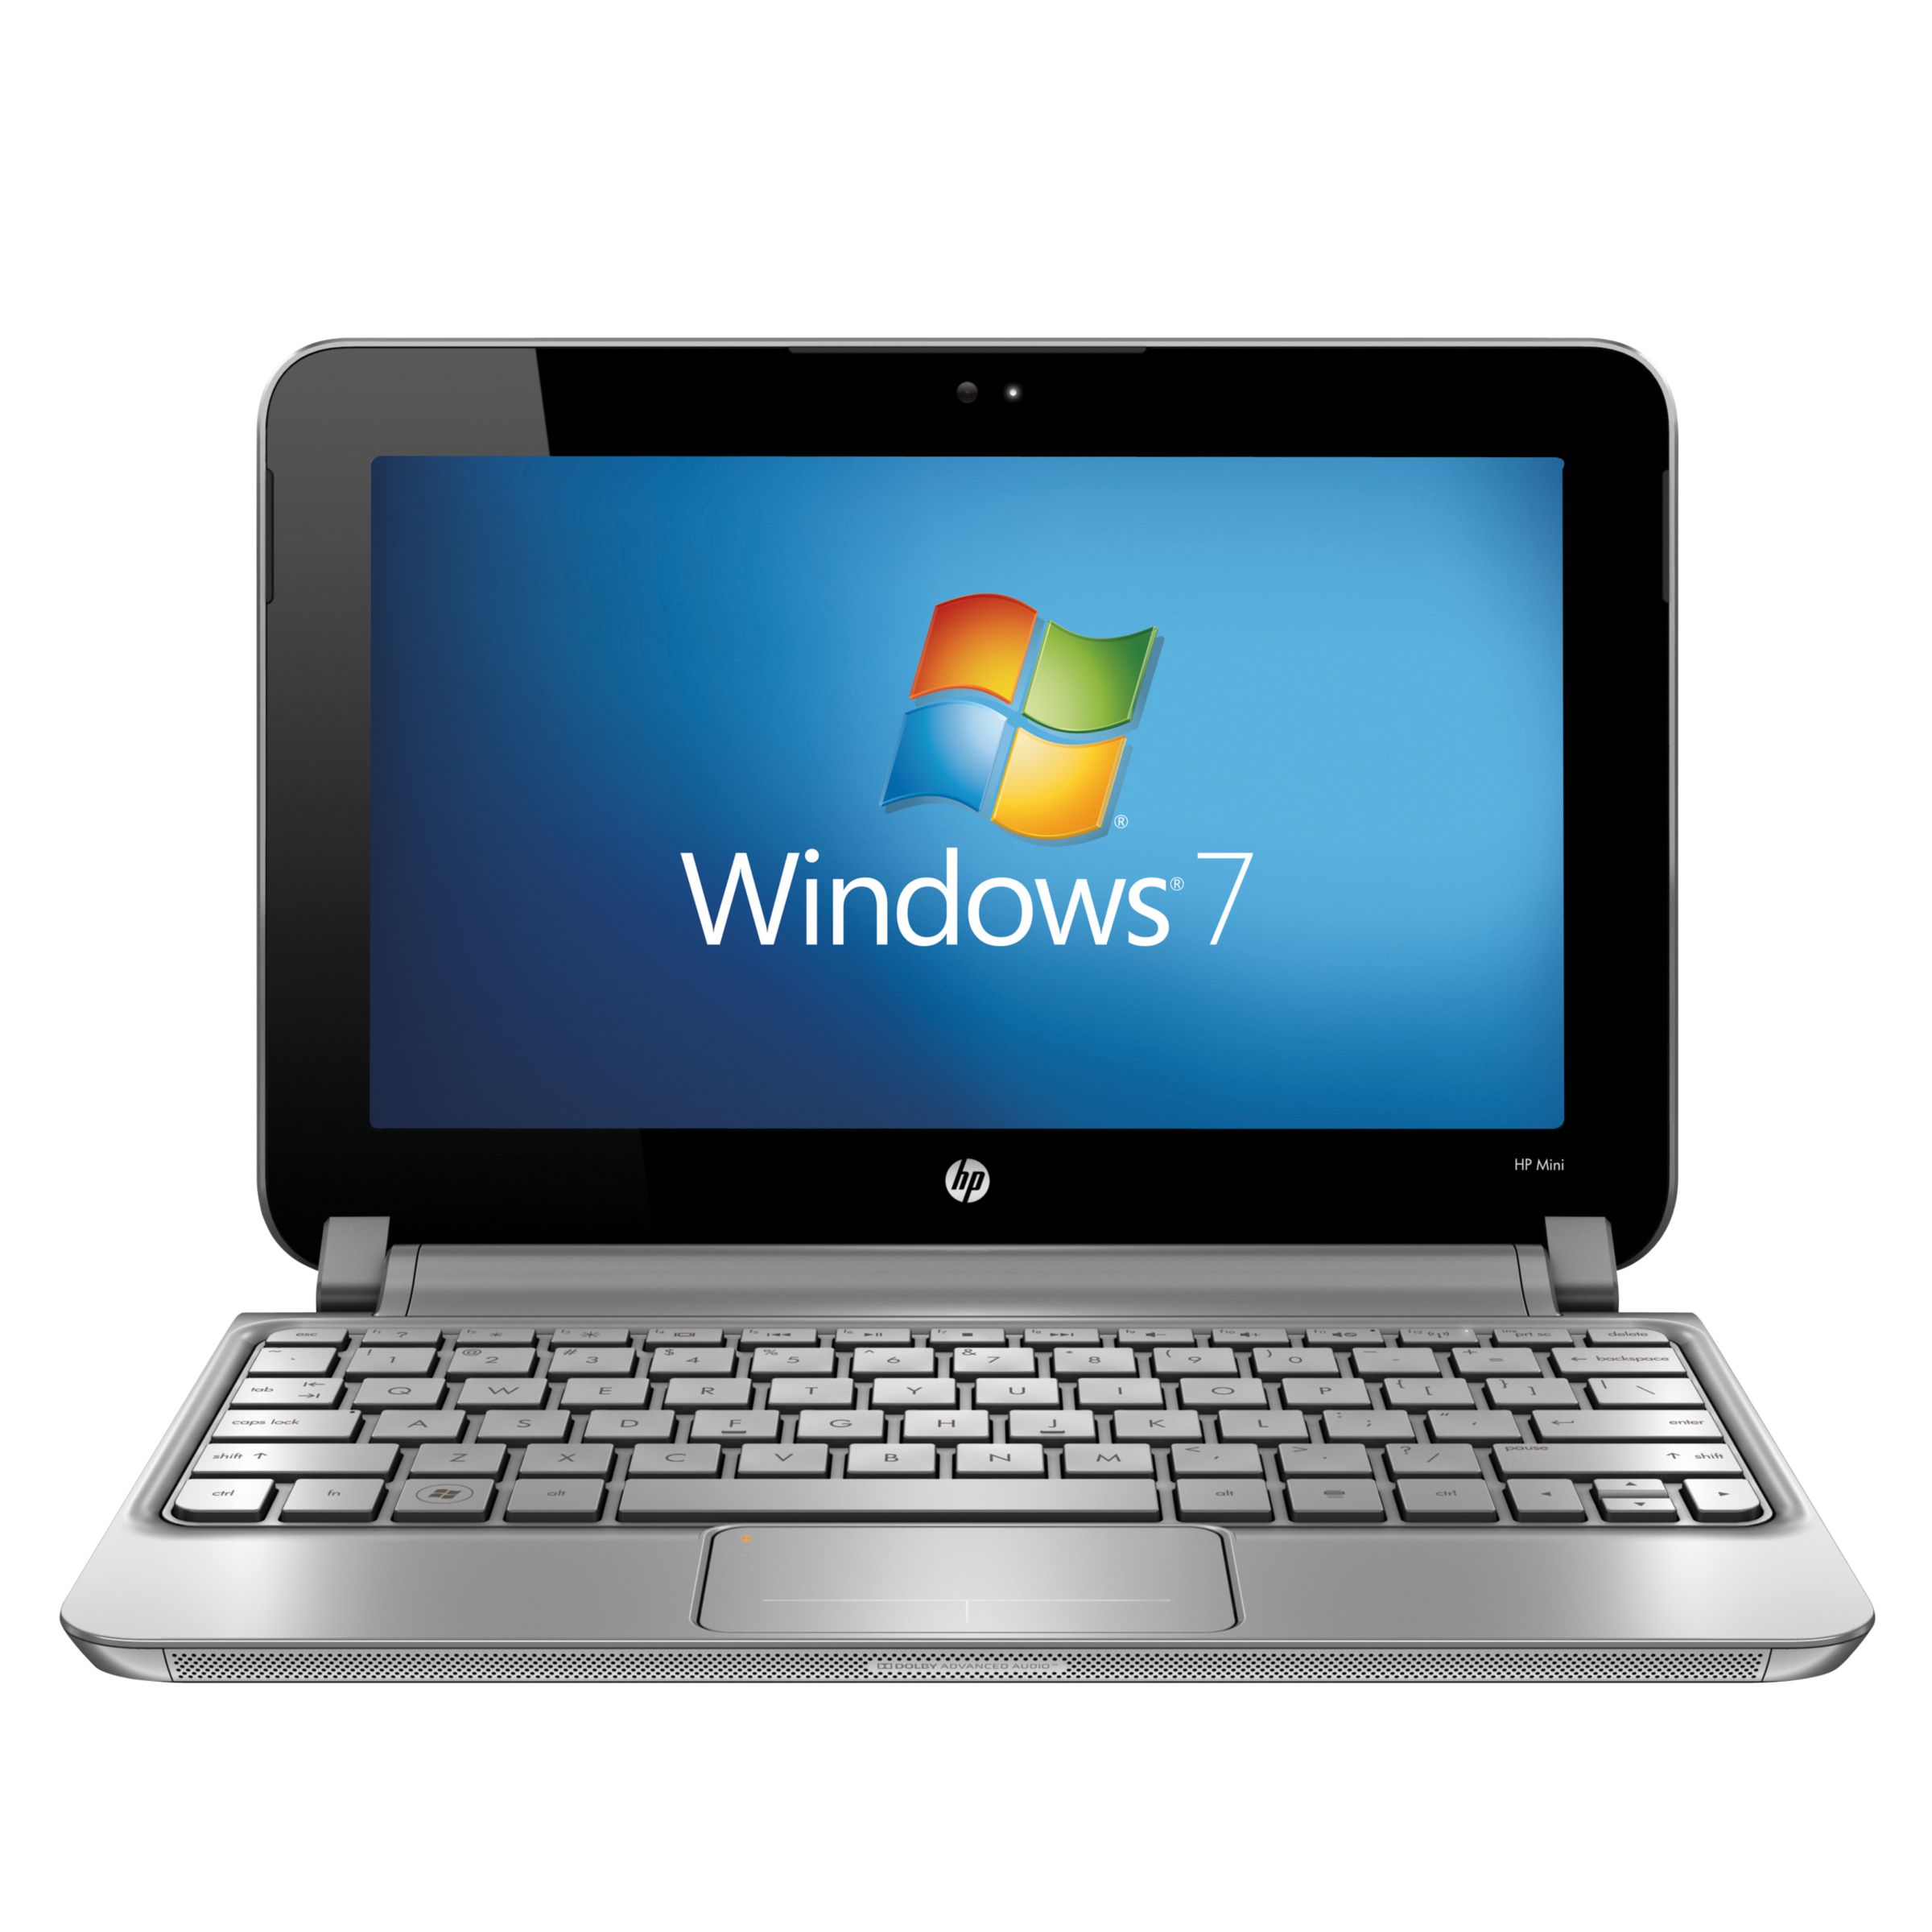 HP Mini 210-2003SA Netbook, 1.66GHz with 10.1 Inch Display, Blue at John Lewis